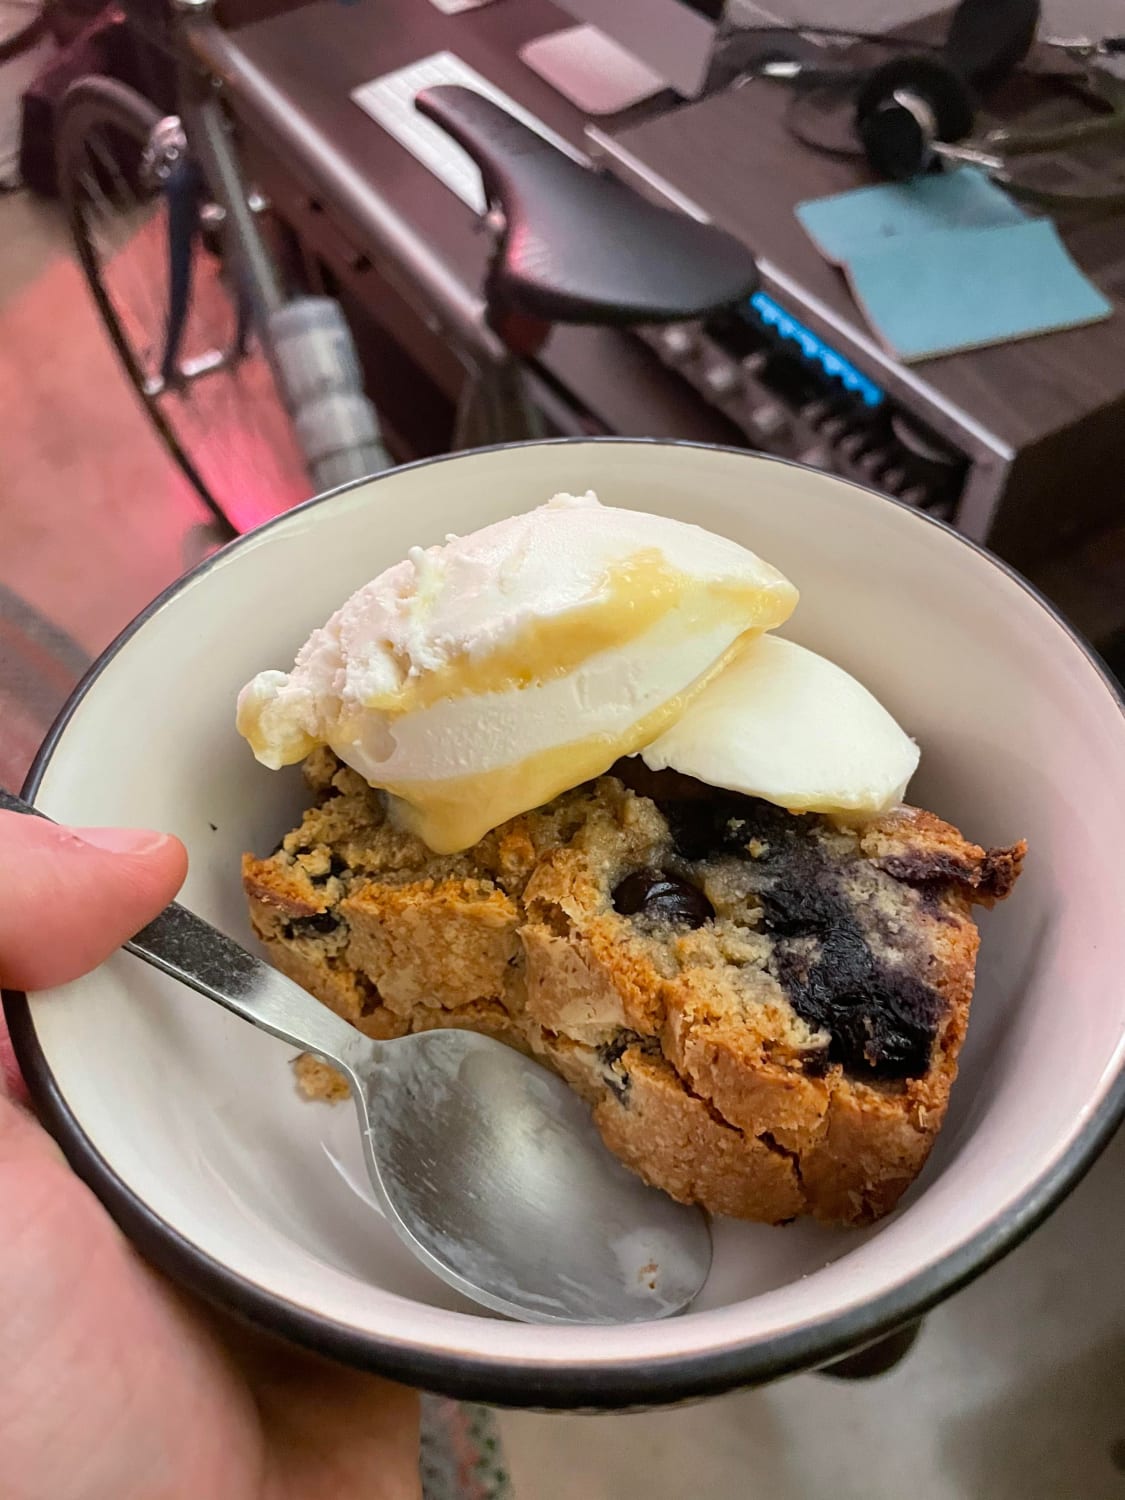 Blueberry olive oil cake with lemon curd ice cream. Didn’t make the ice cream, but I saw it in the store and thought this cake would pair well! Wonderful combination.